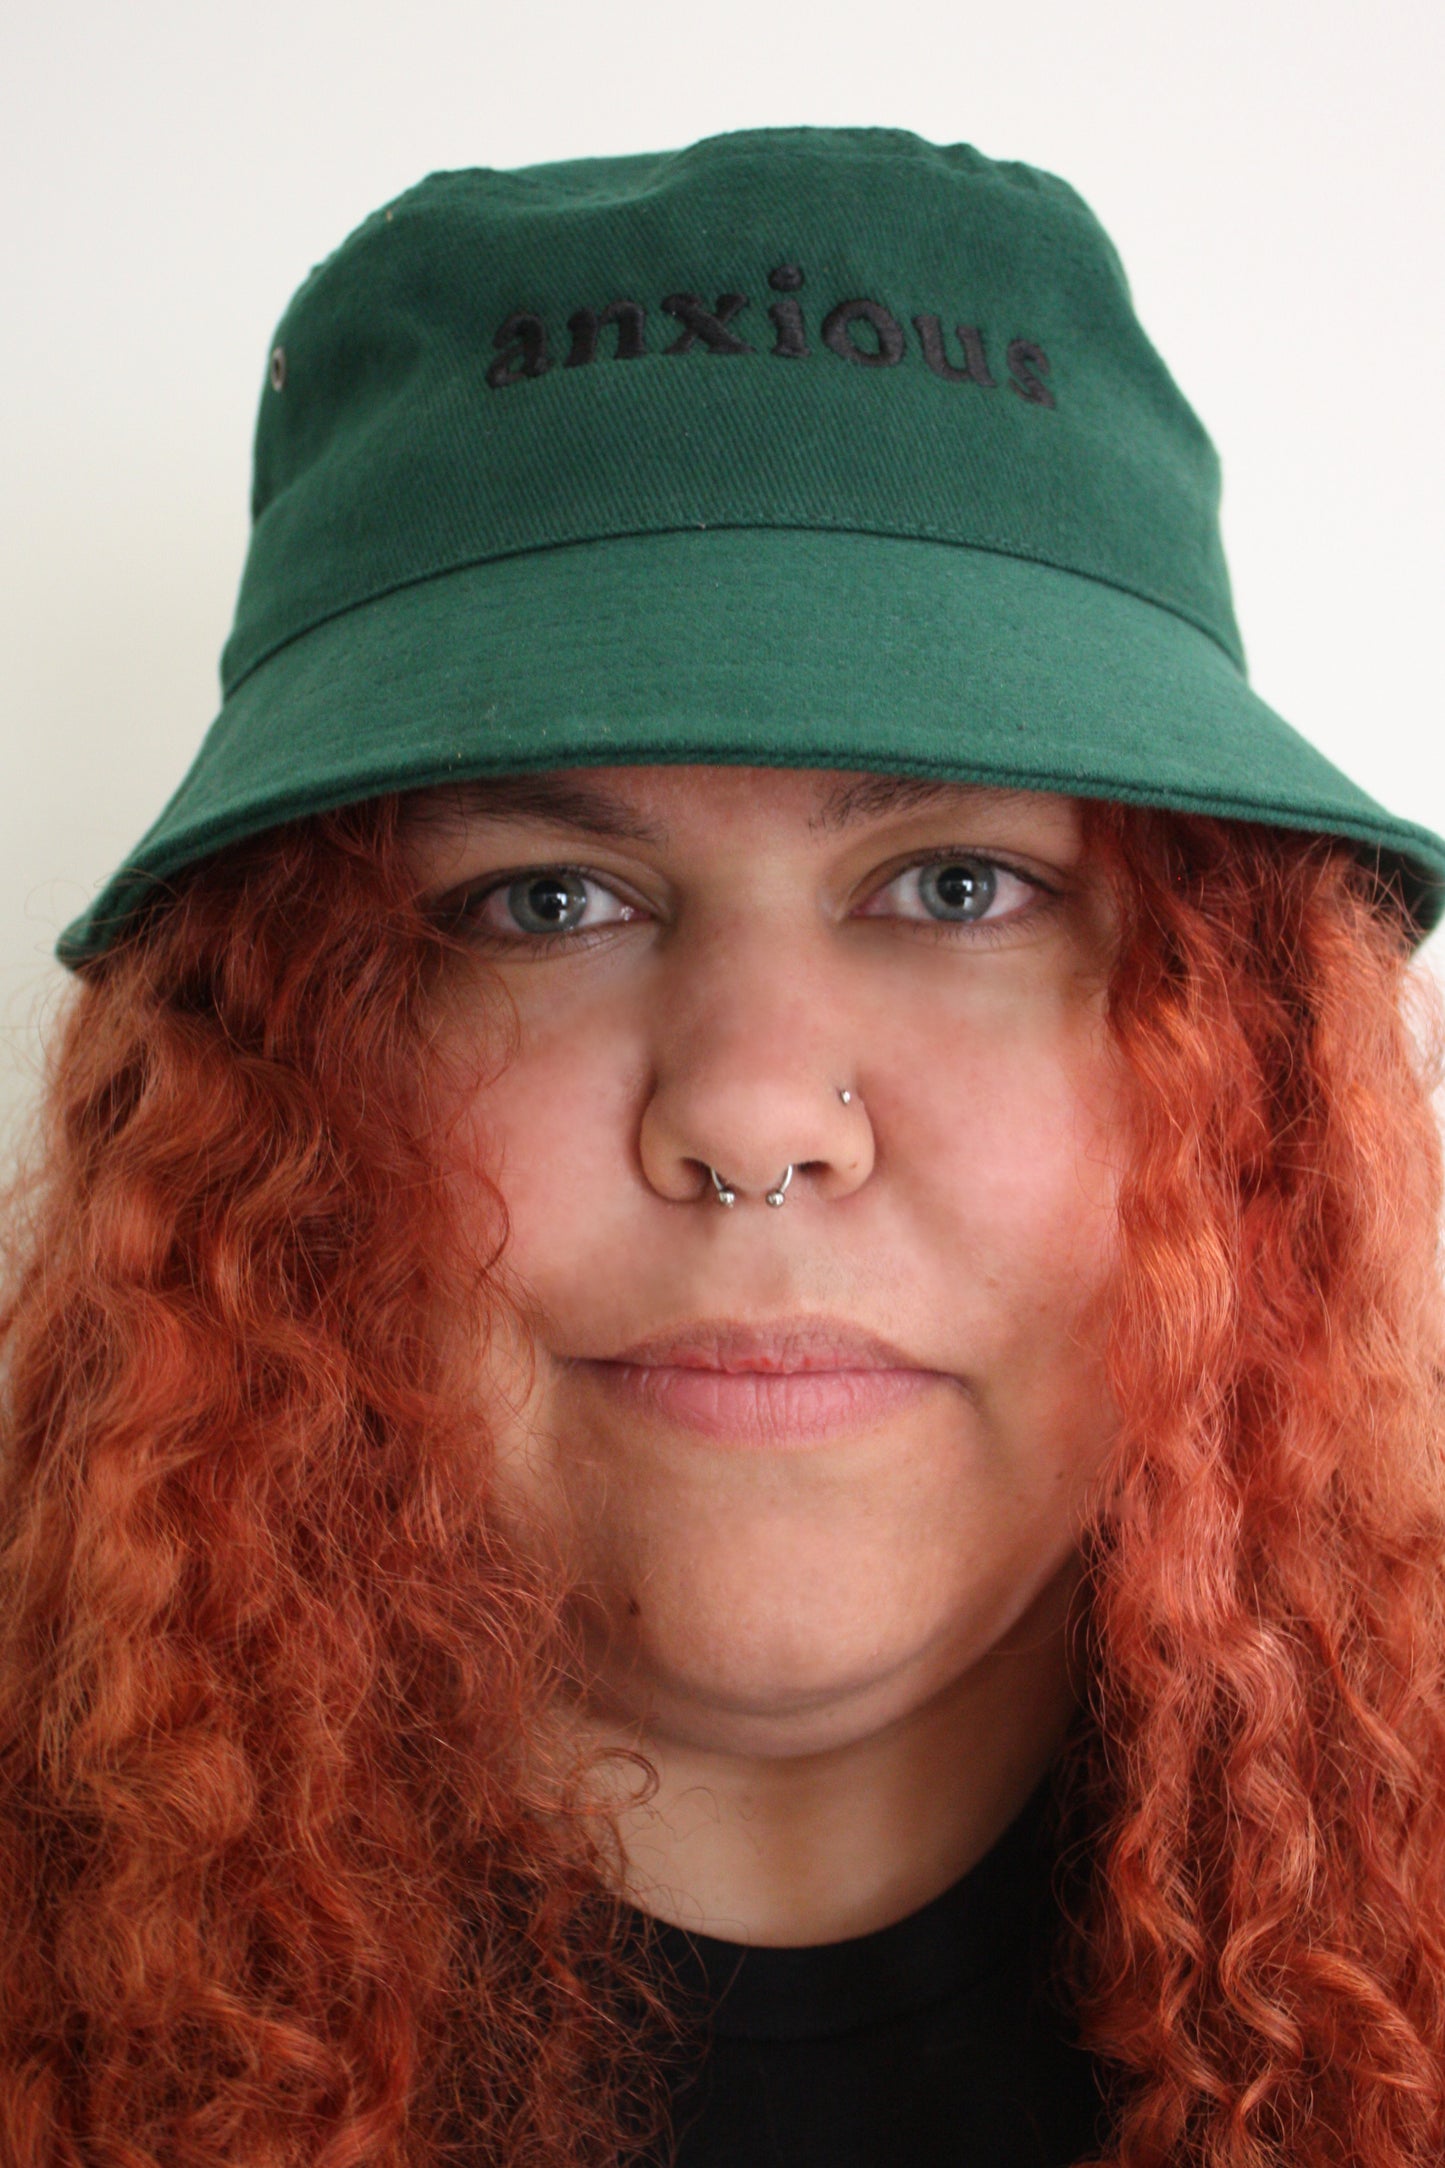 Bucket of Anxiety - Cooked Concepts (the best hat for sun protection, but a warning to others your anxiety is a thing. Bottle green with black embroidery saying ANXIOUS)